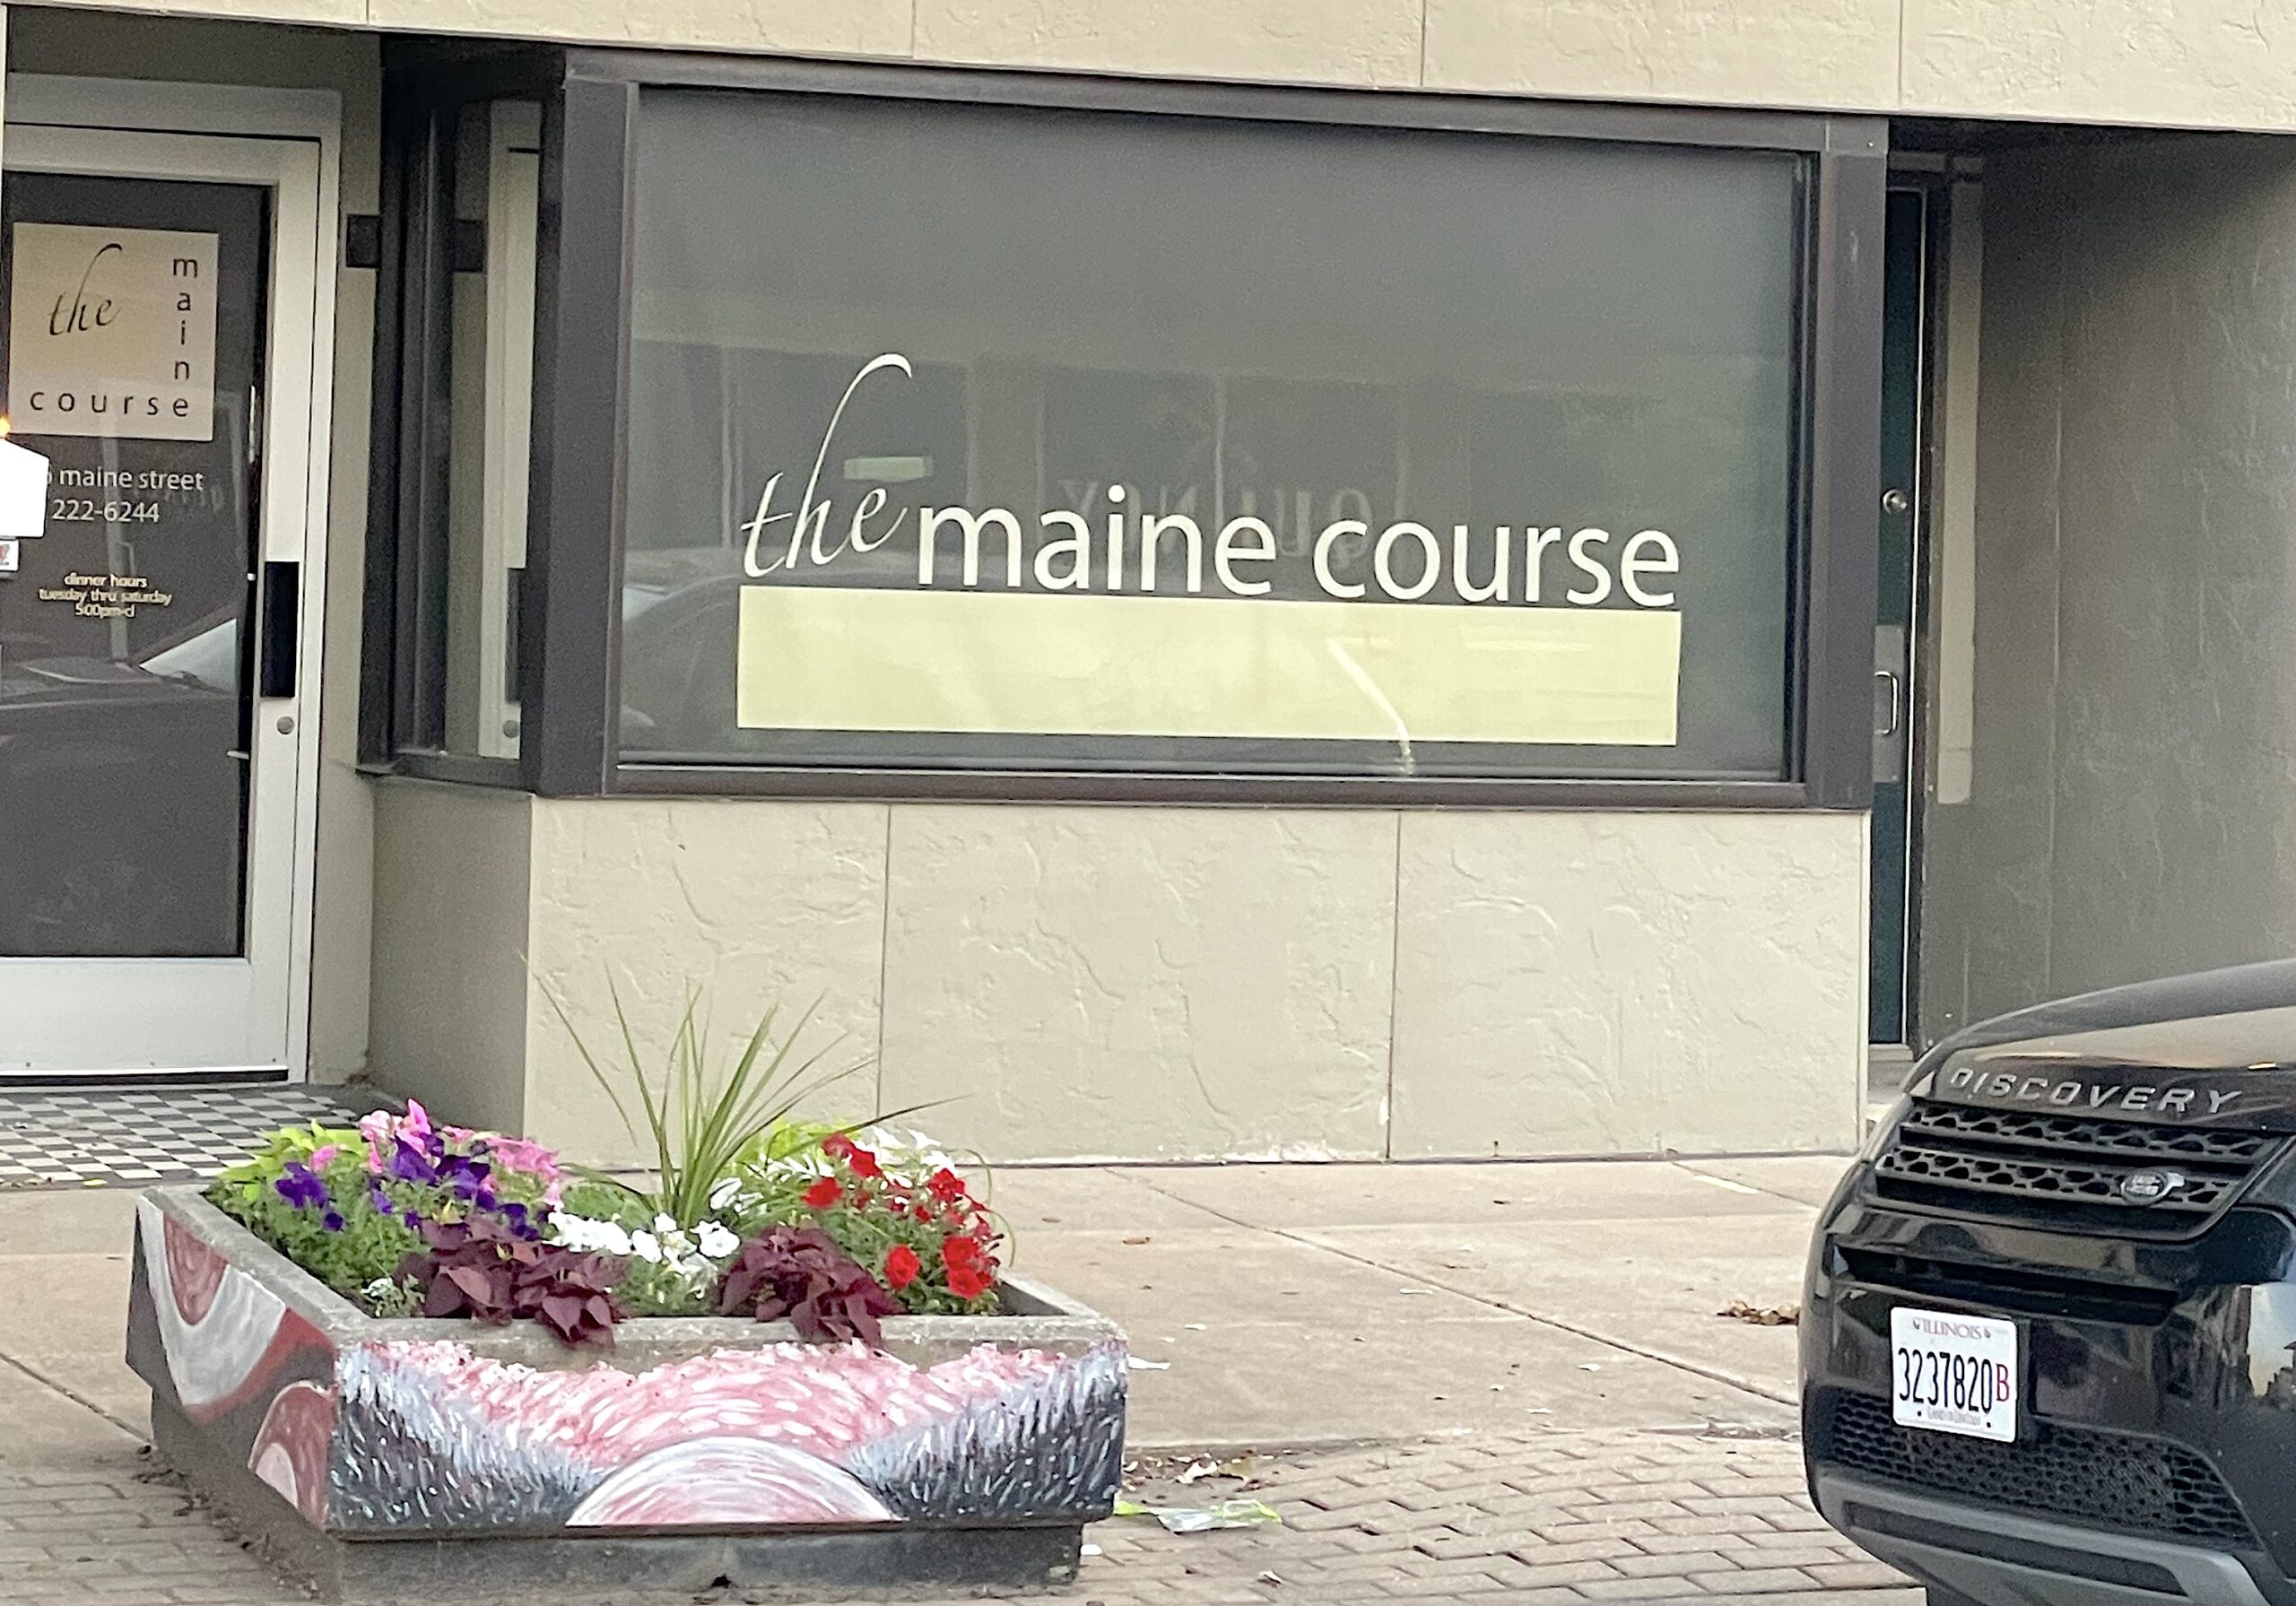 'The Maine Course has run its course': Owner closing regular dining services to focus on private parties, catering – Muddy River News